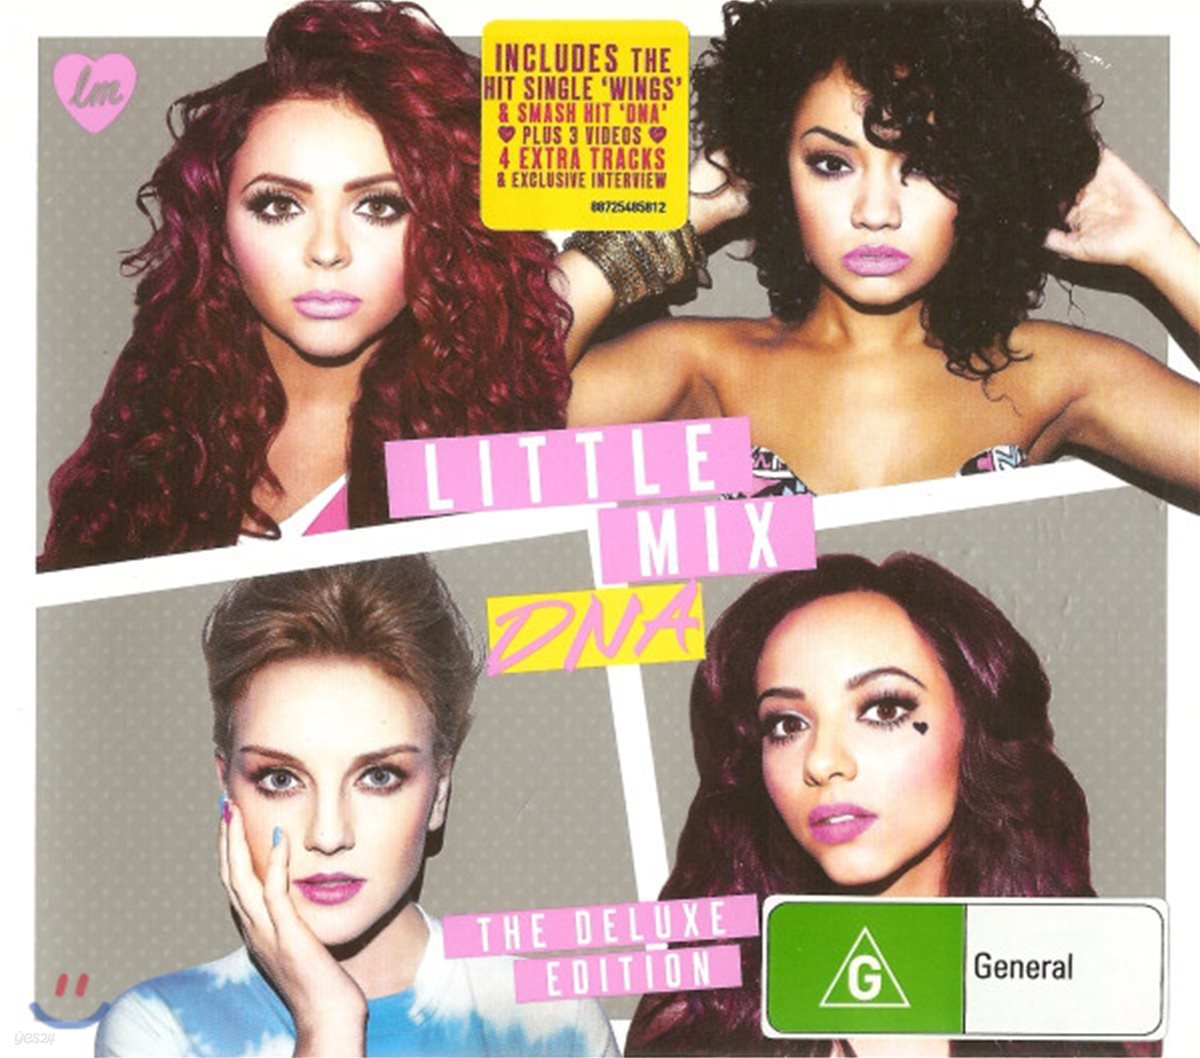 Little Mix - Dna (Deluxe Edition)